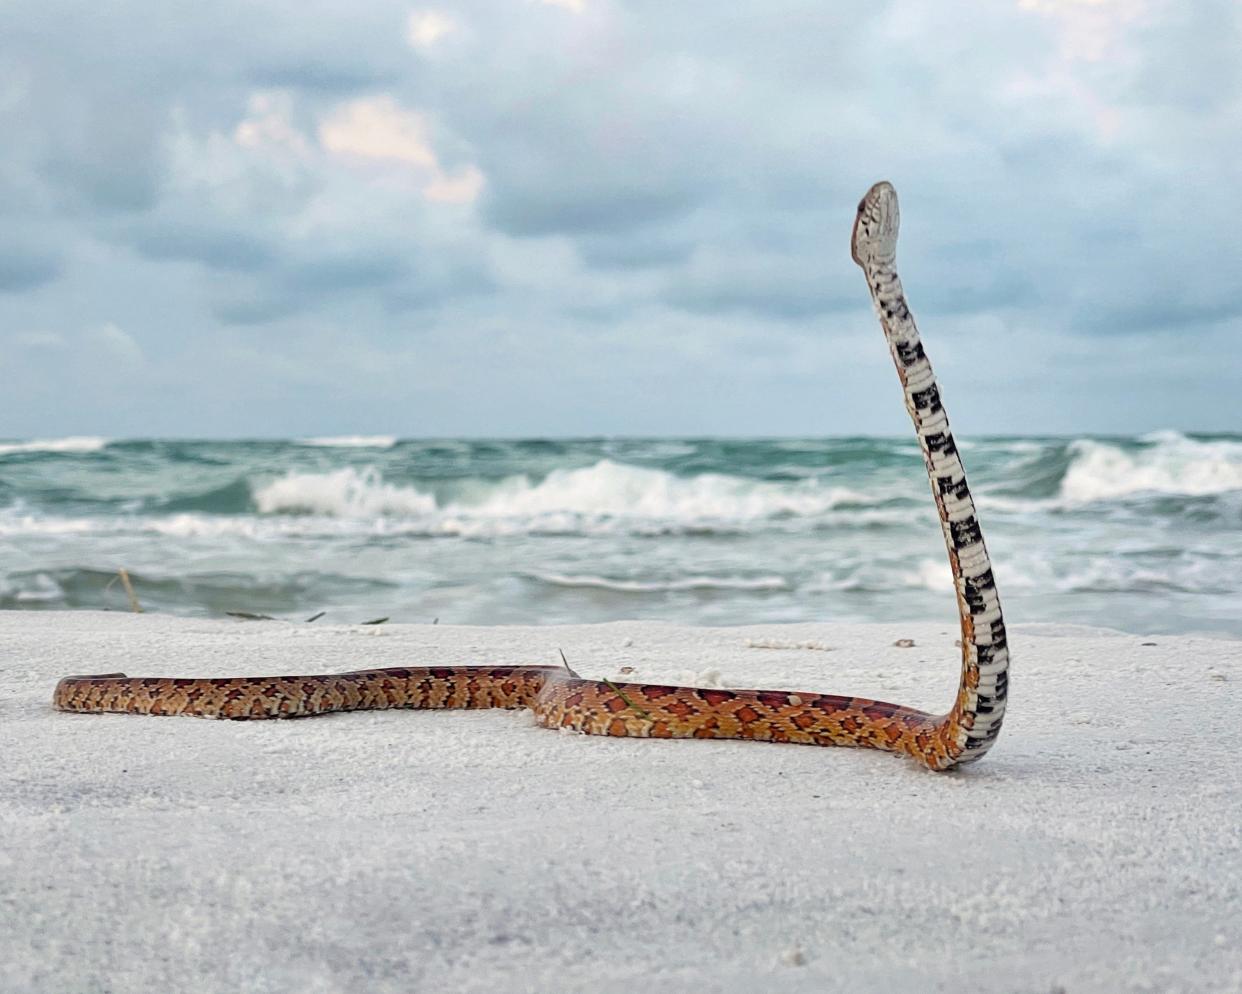 Diane Fairey's "Corn Snake Enjoying the Salty Air" won Best in Show and the Fabulously Florida category in People's Choice voting in the fourth annual Summer Photo Contest sponsored by the Conservation Foundation of the Gulf Coast.